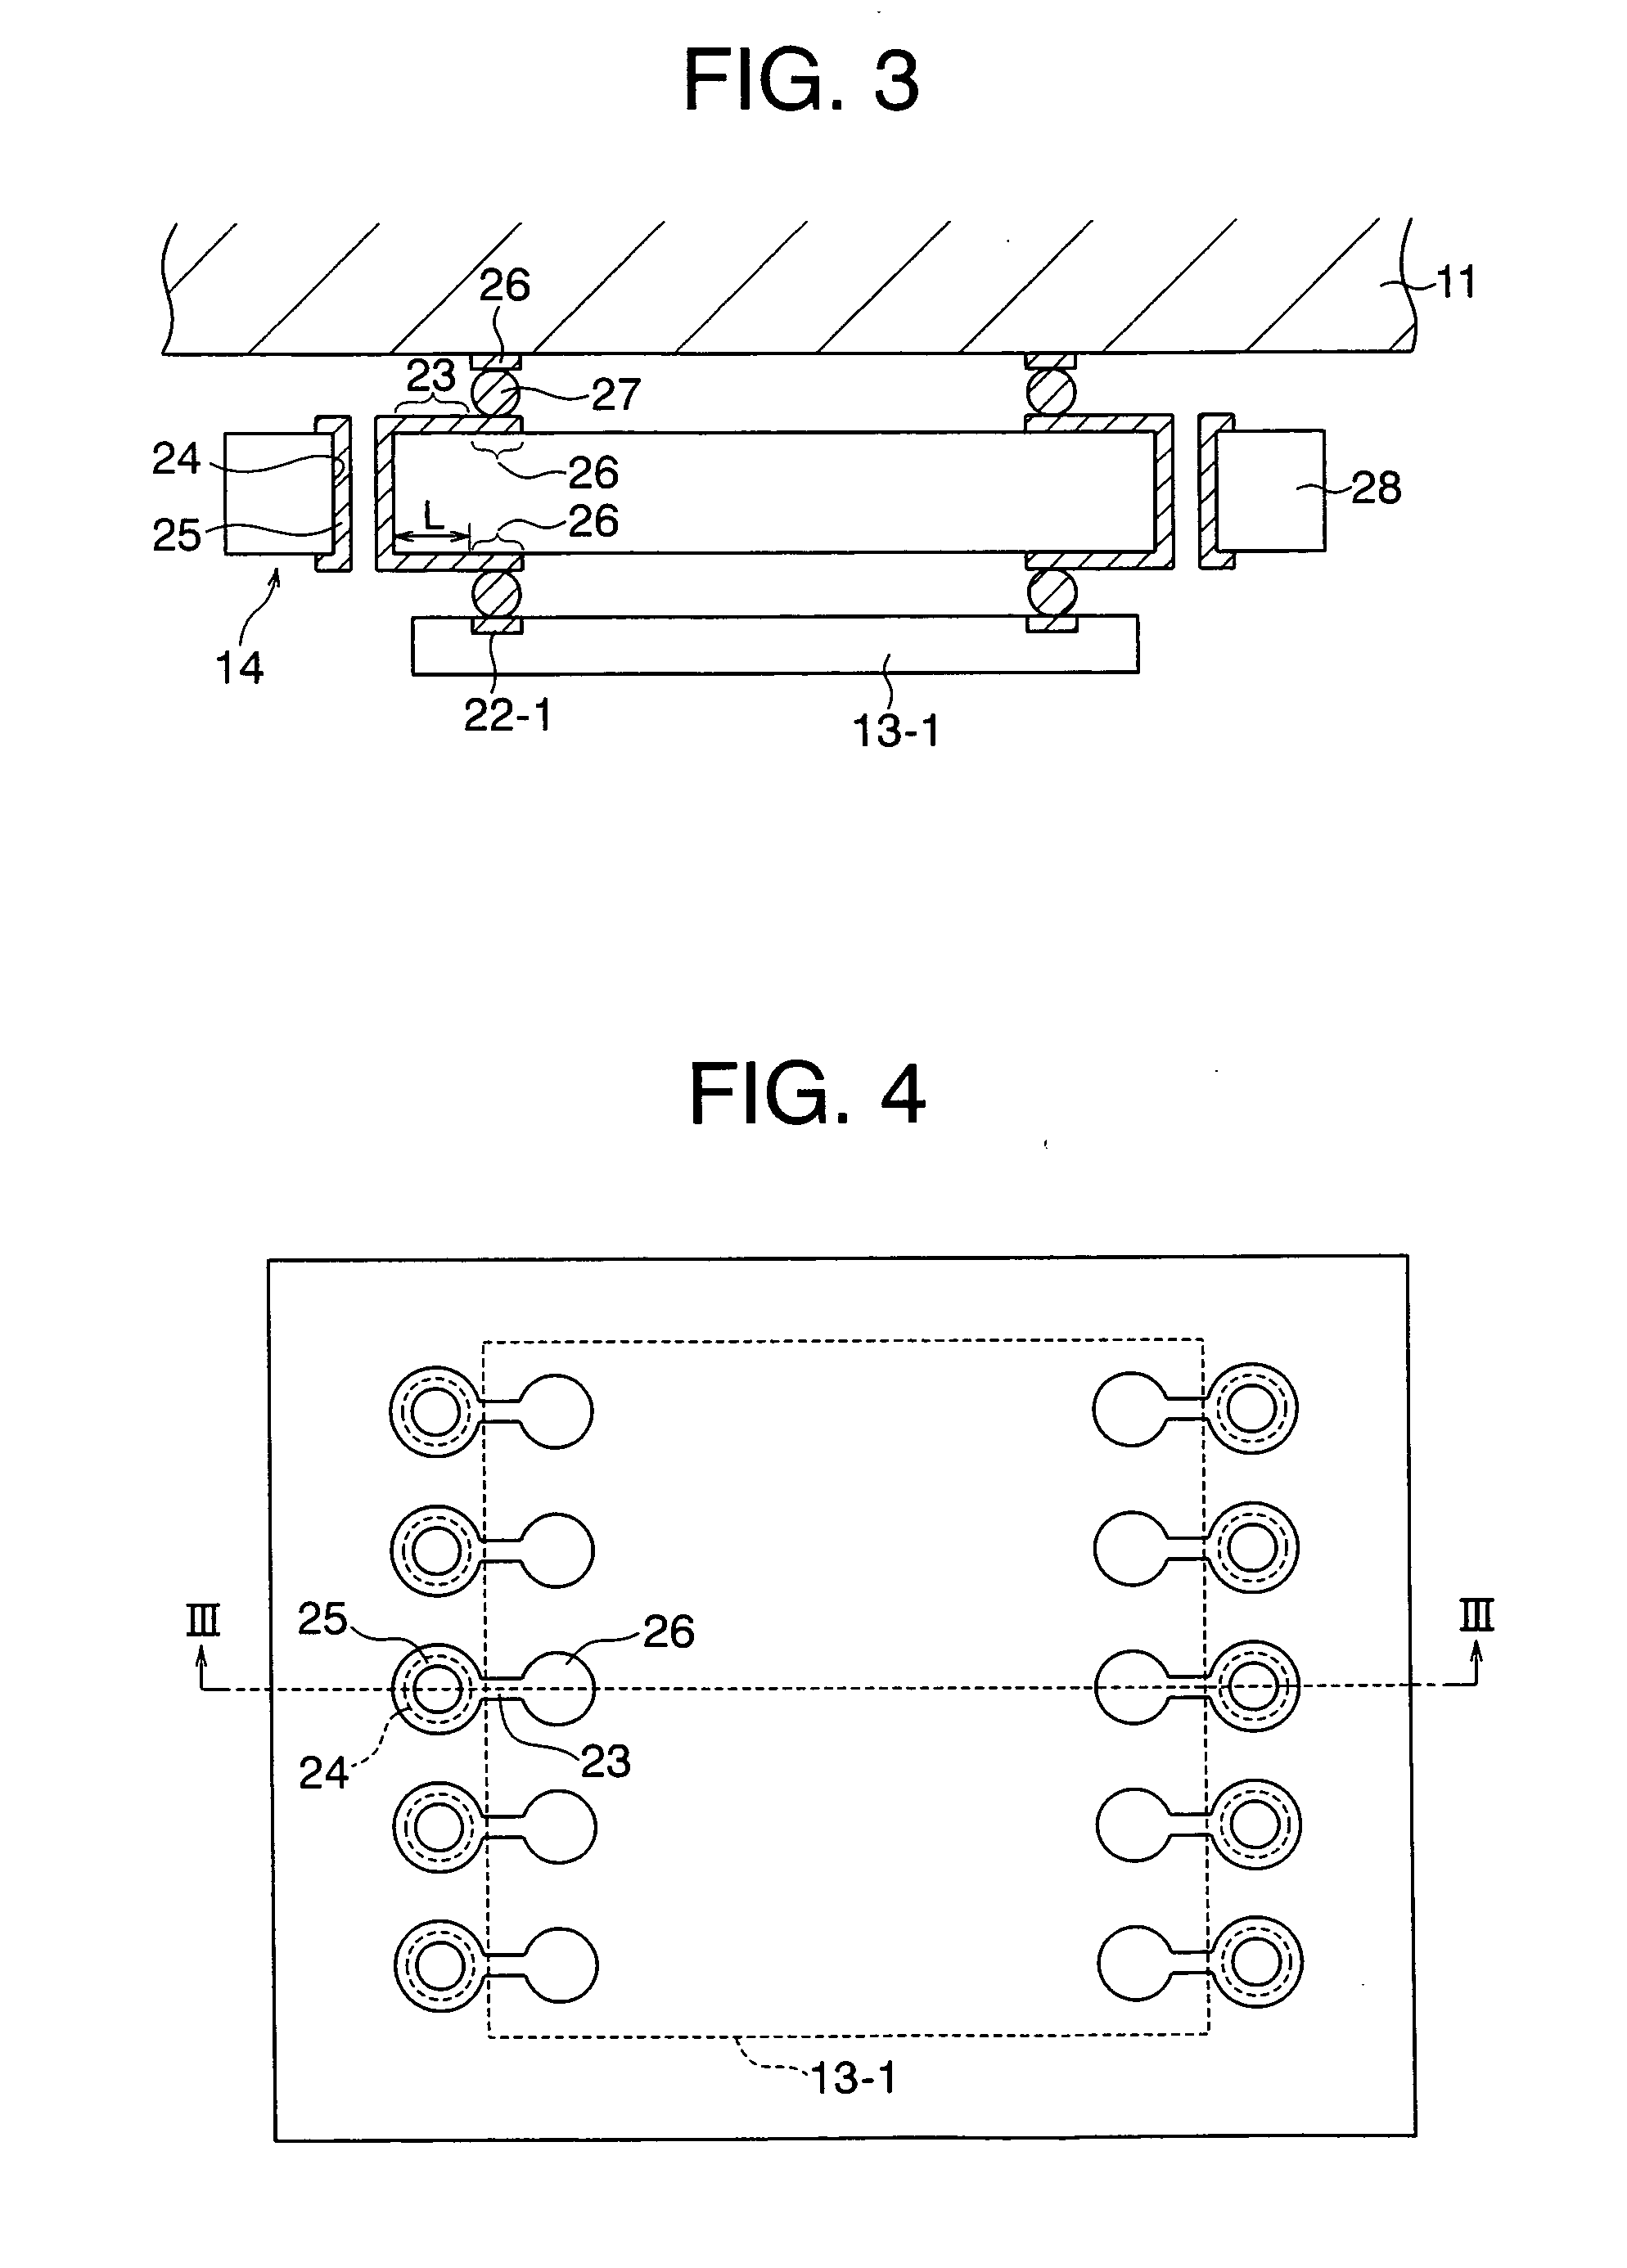 Semiconductor module including a plurality of IC chips therein